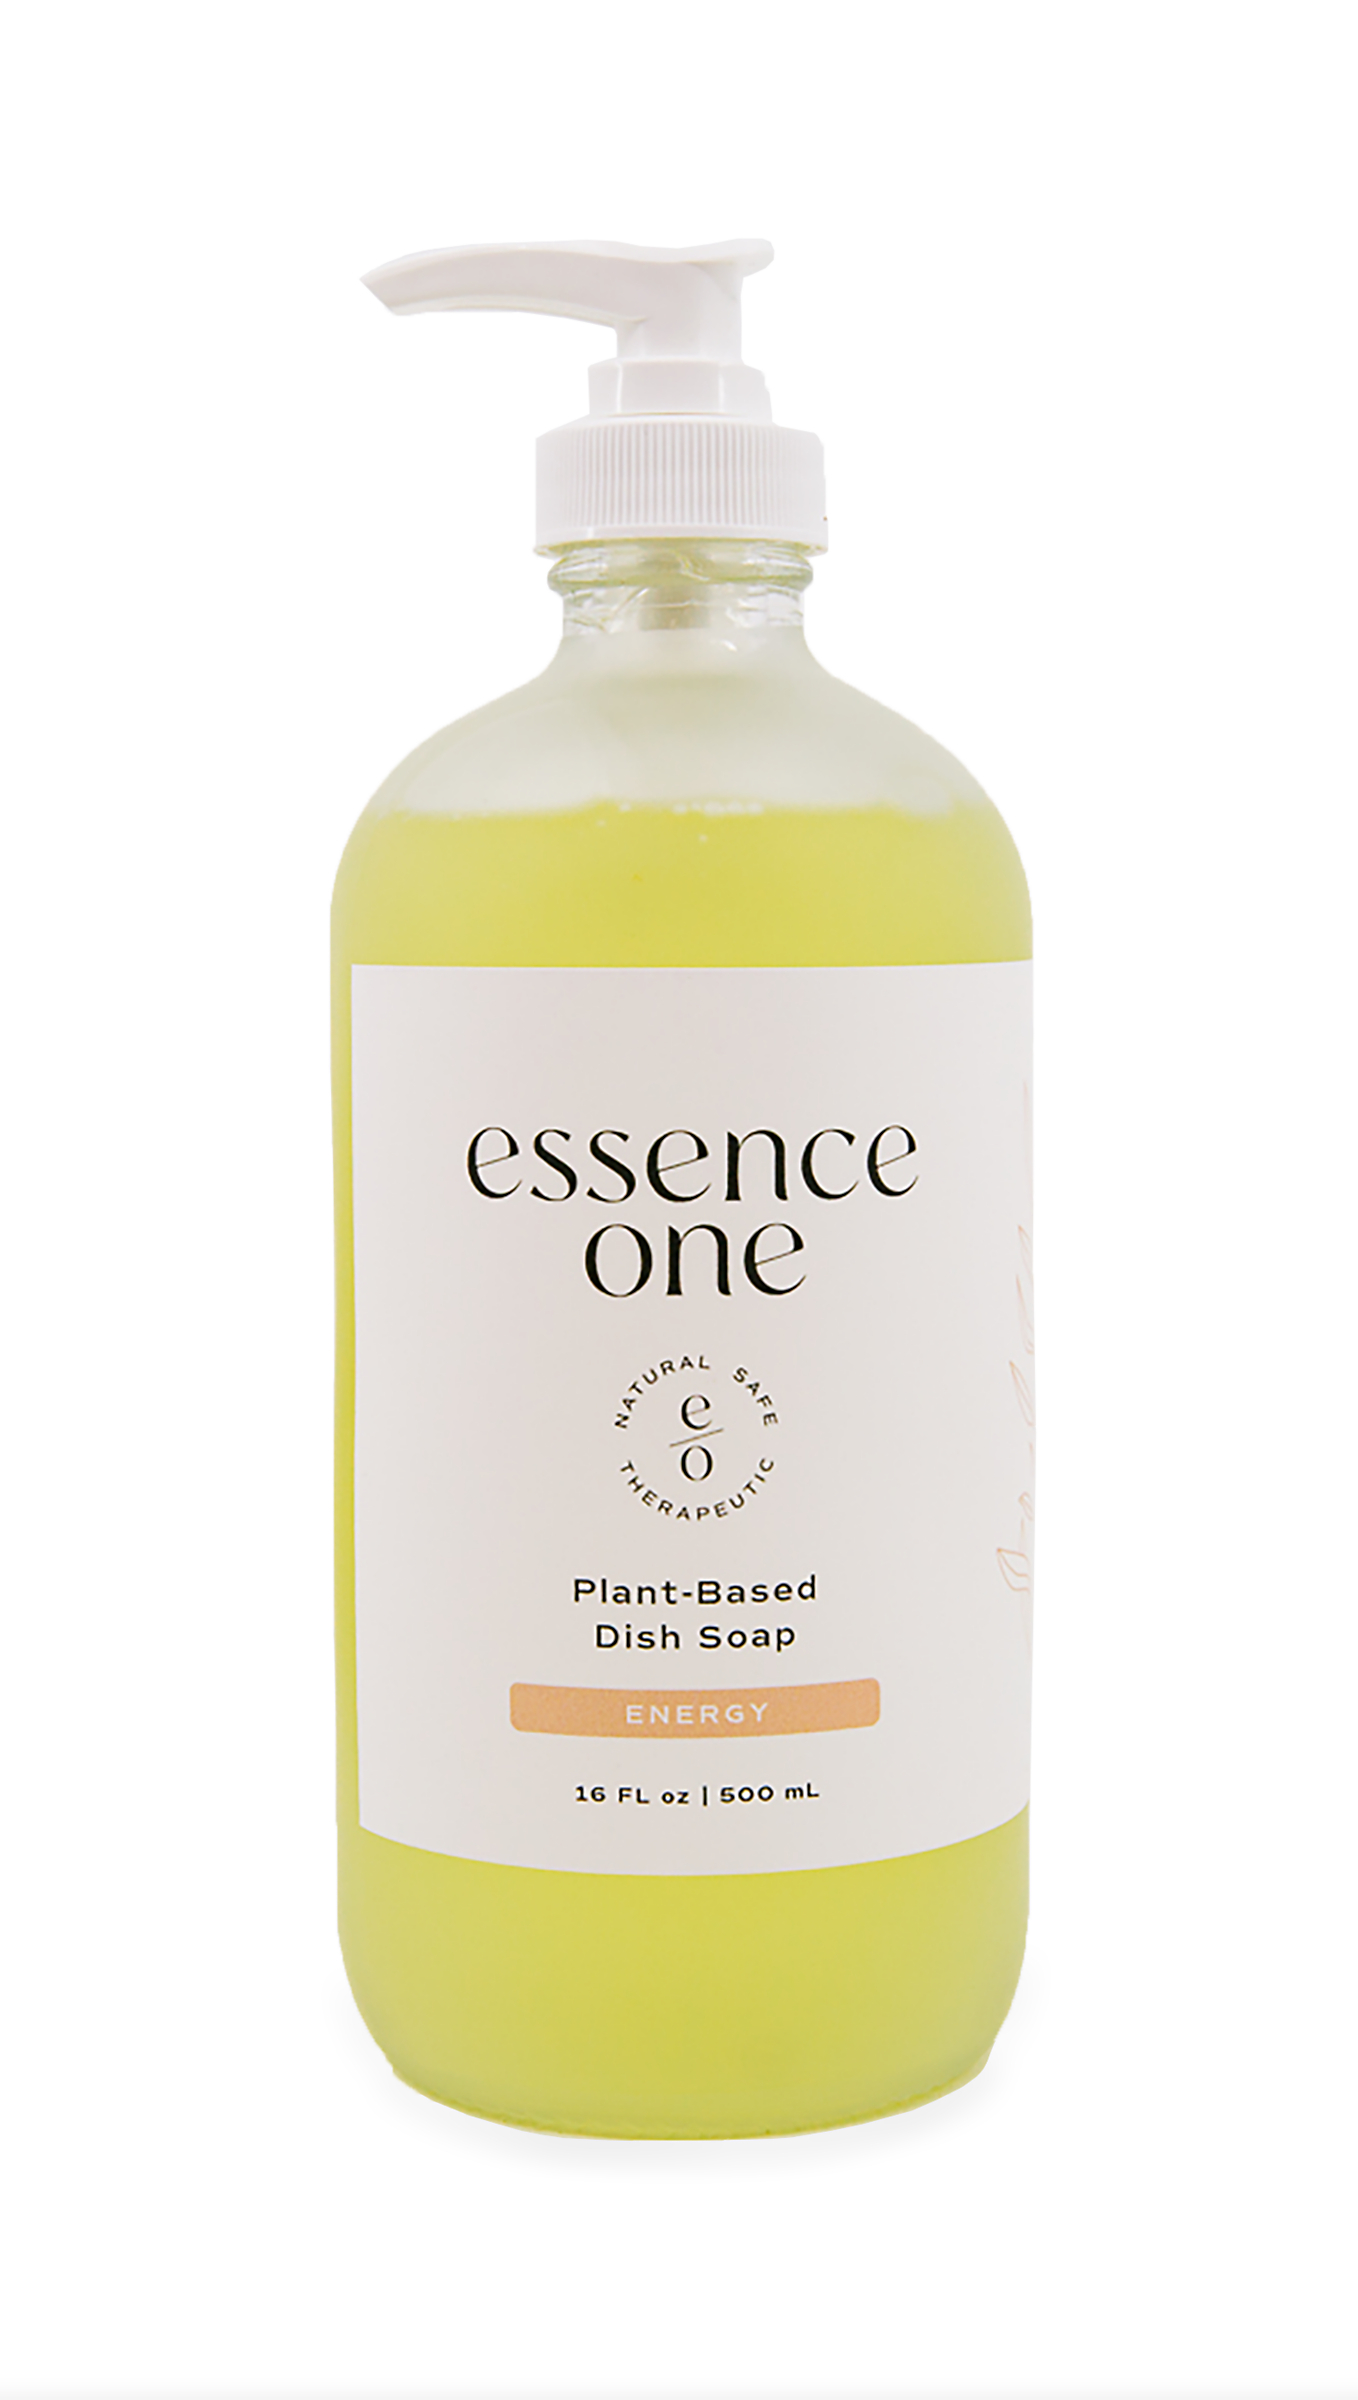 Essence One - Dish Soap in Energy